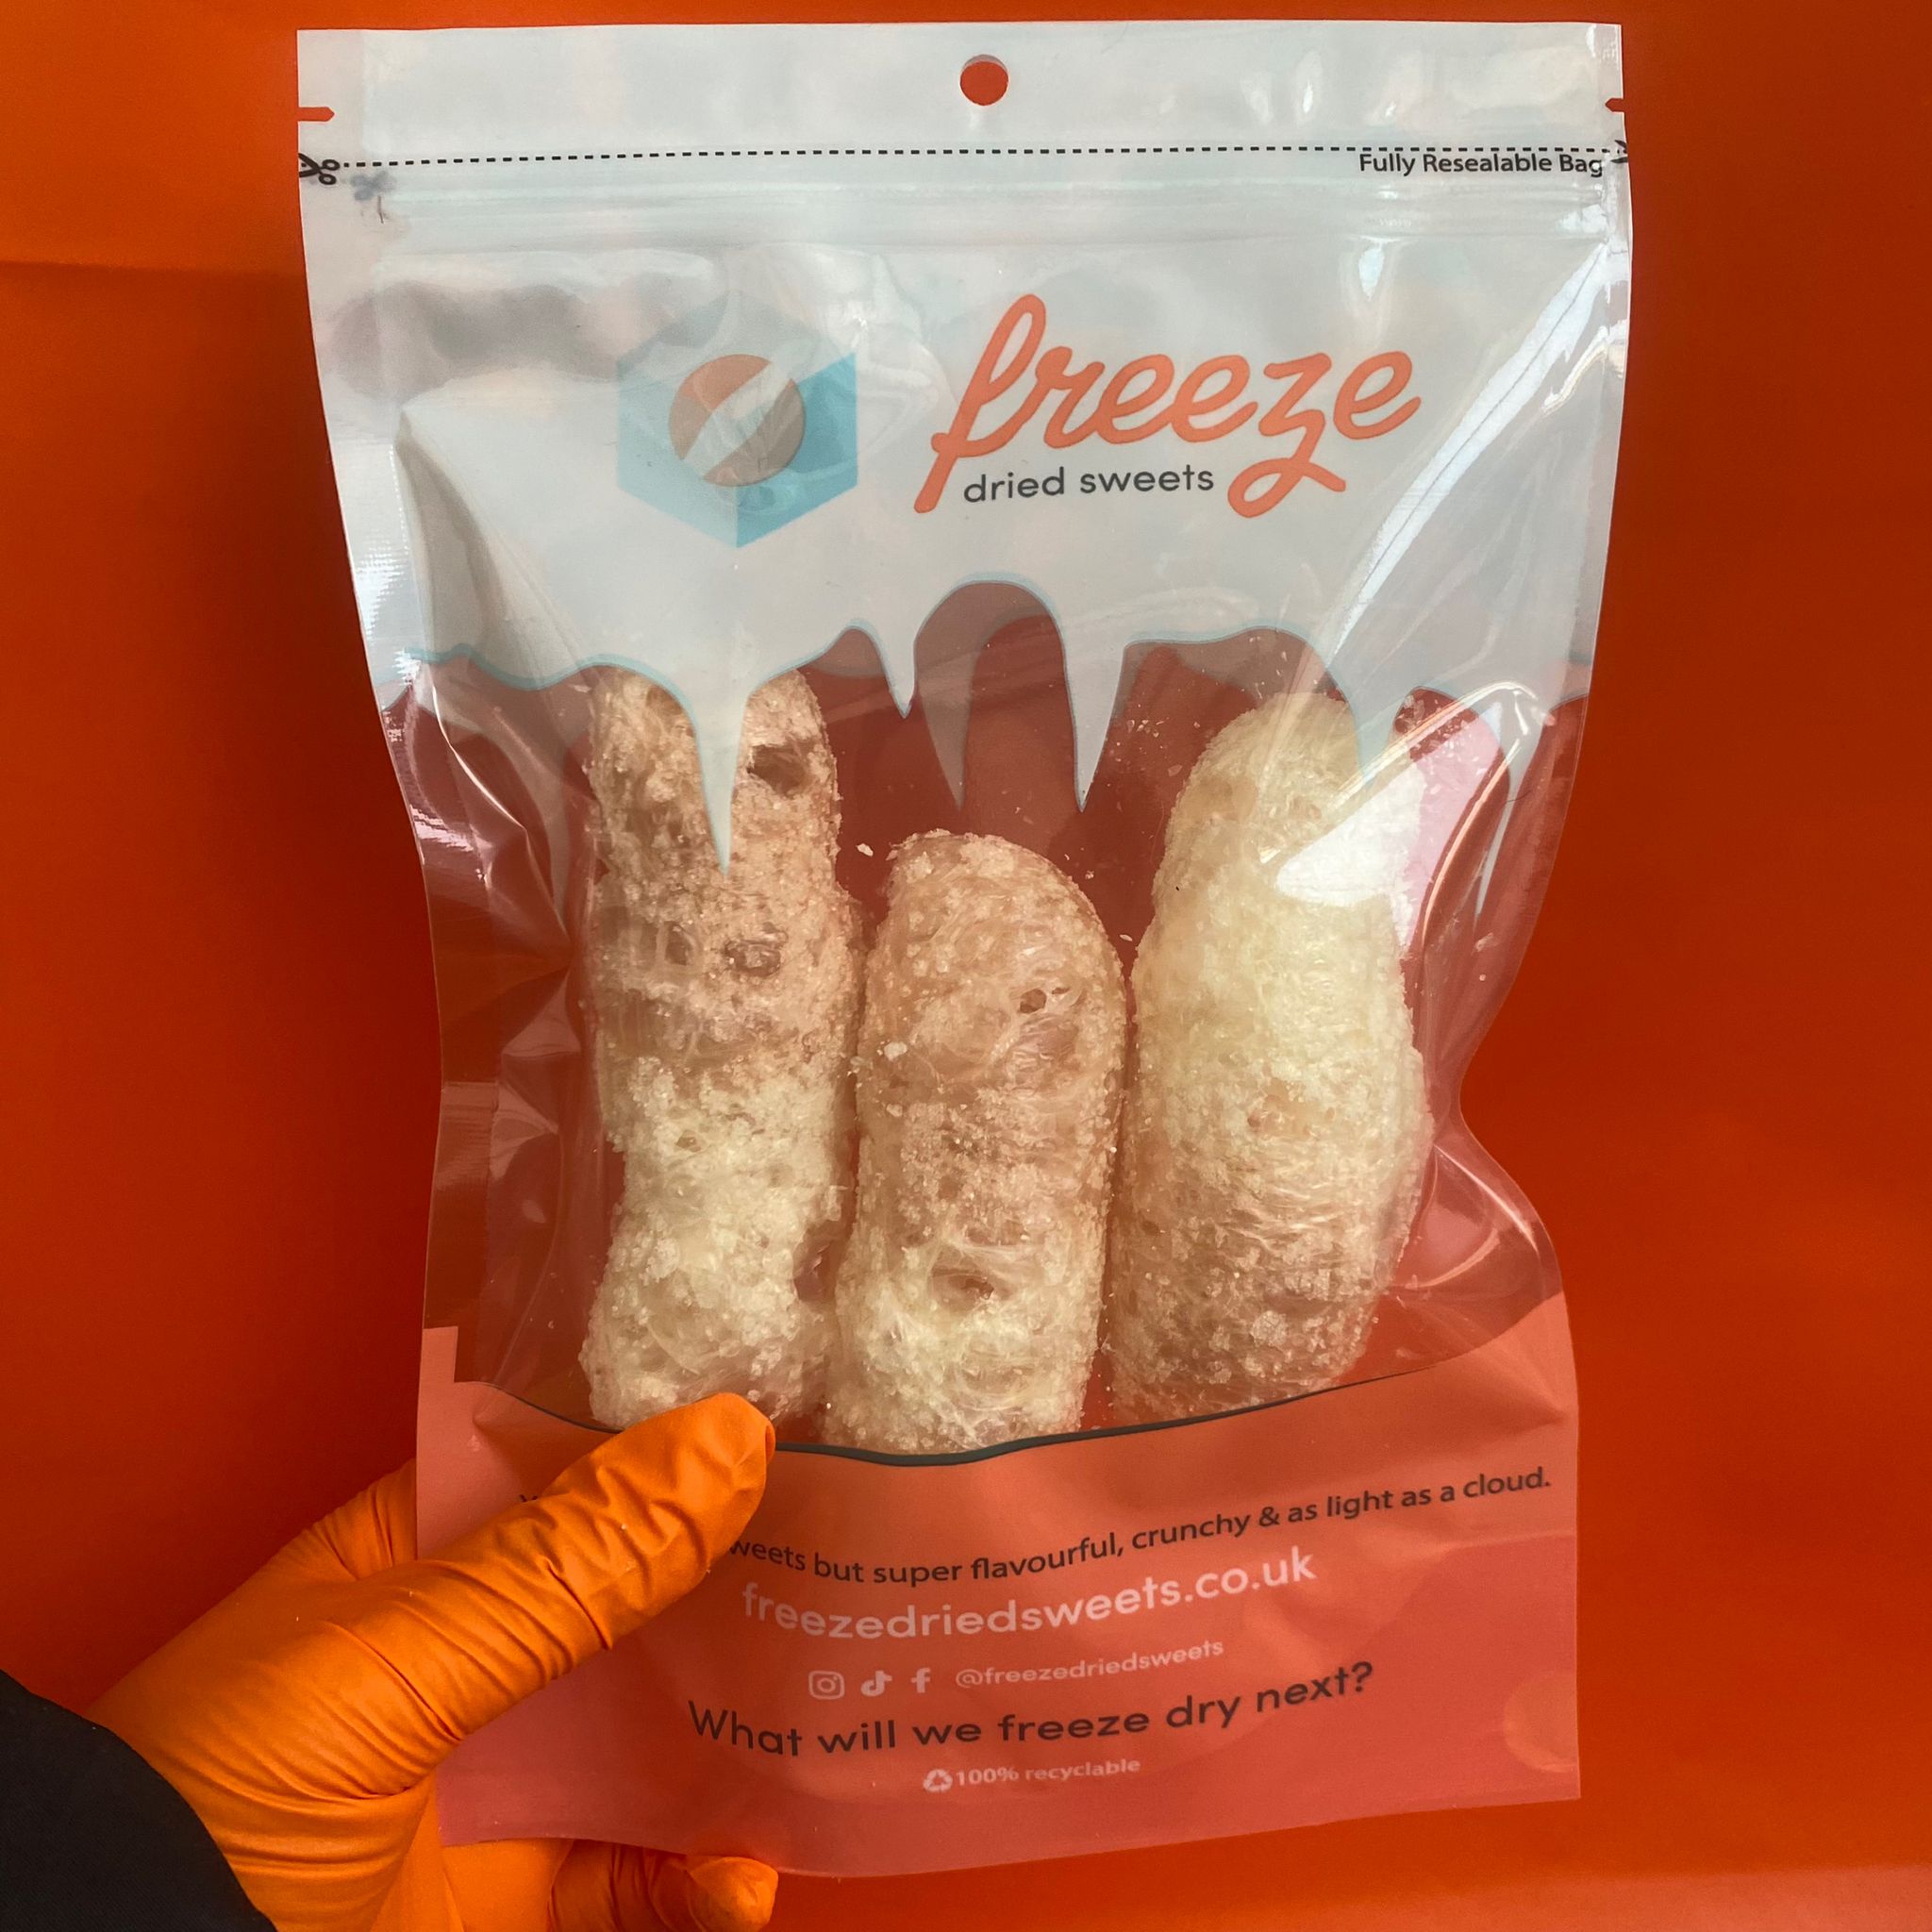 Large Cola Bottles - Freeze Dried Sweets